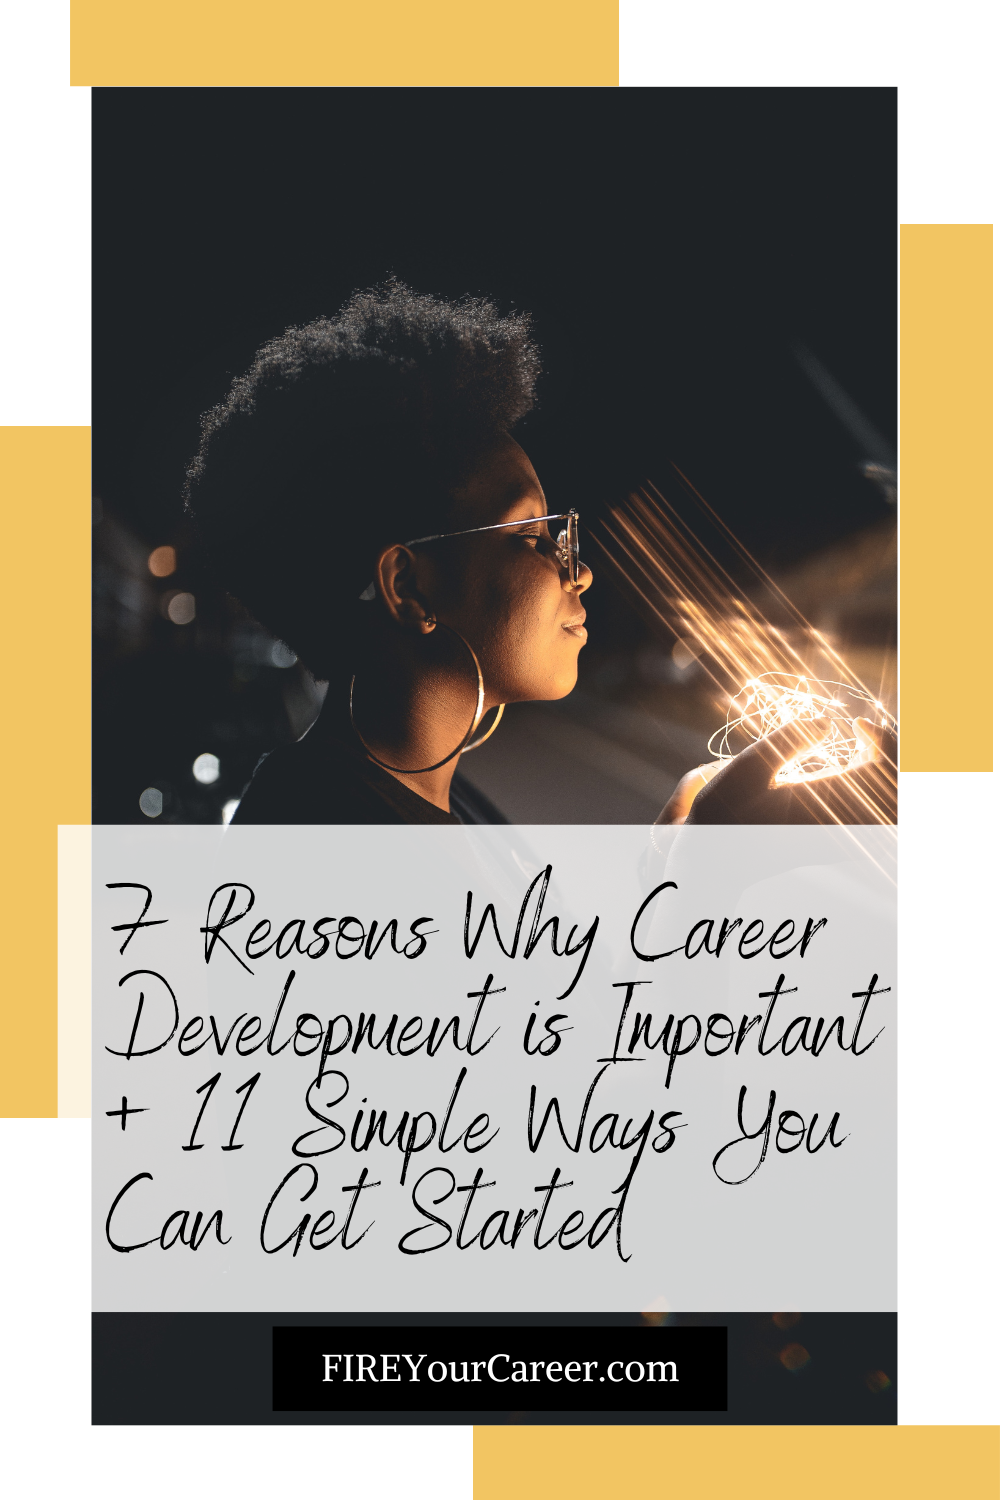 7 Reasons Why Career Development is Important + 11 Simple Ways You Can Get Started Pinterest